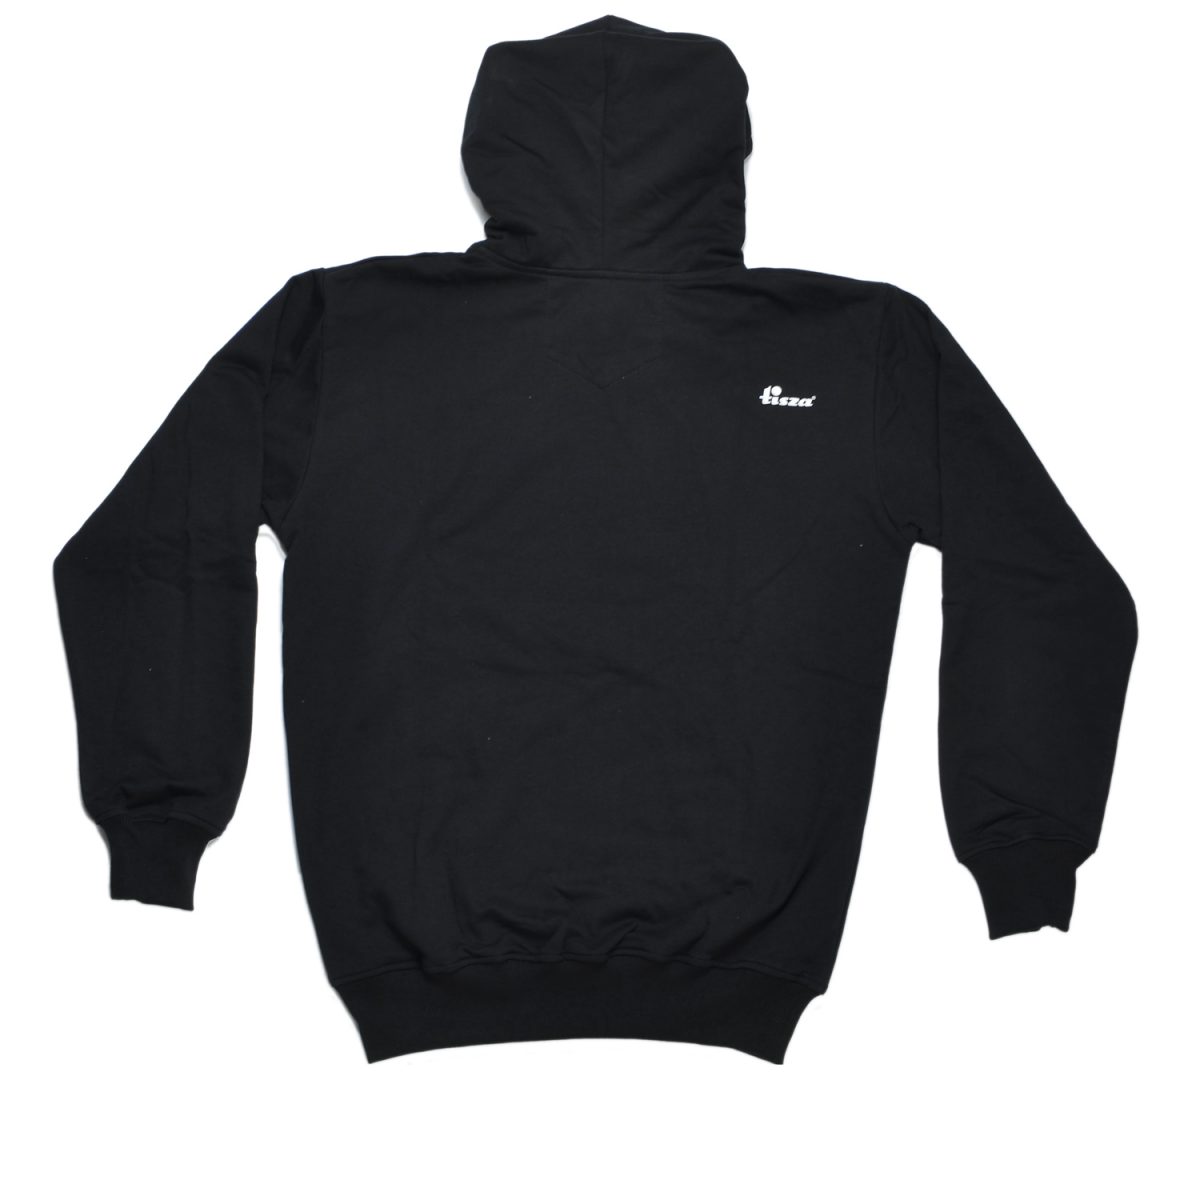 Tisza shoes - Pullover - Black hoodie